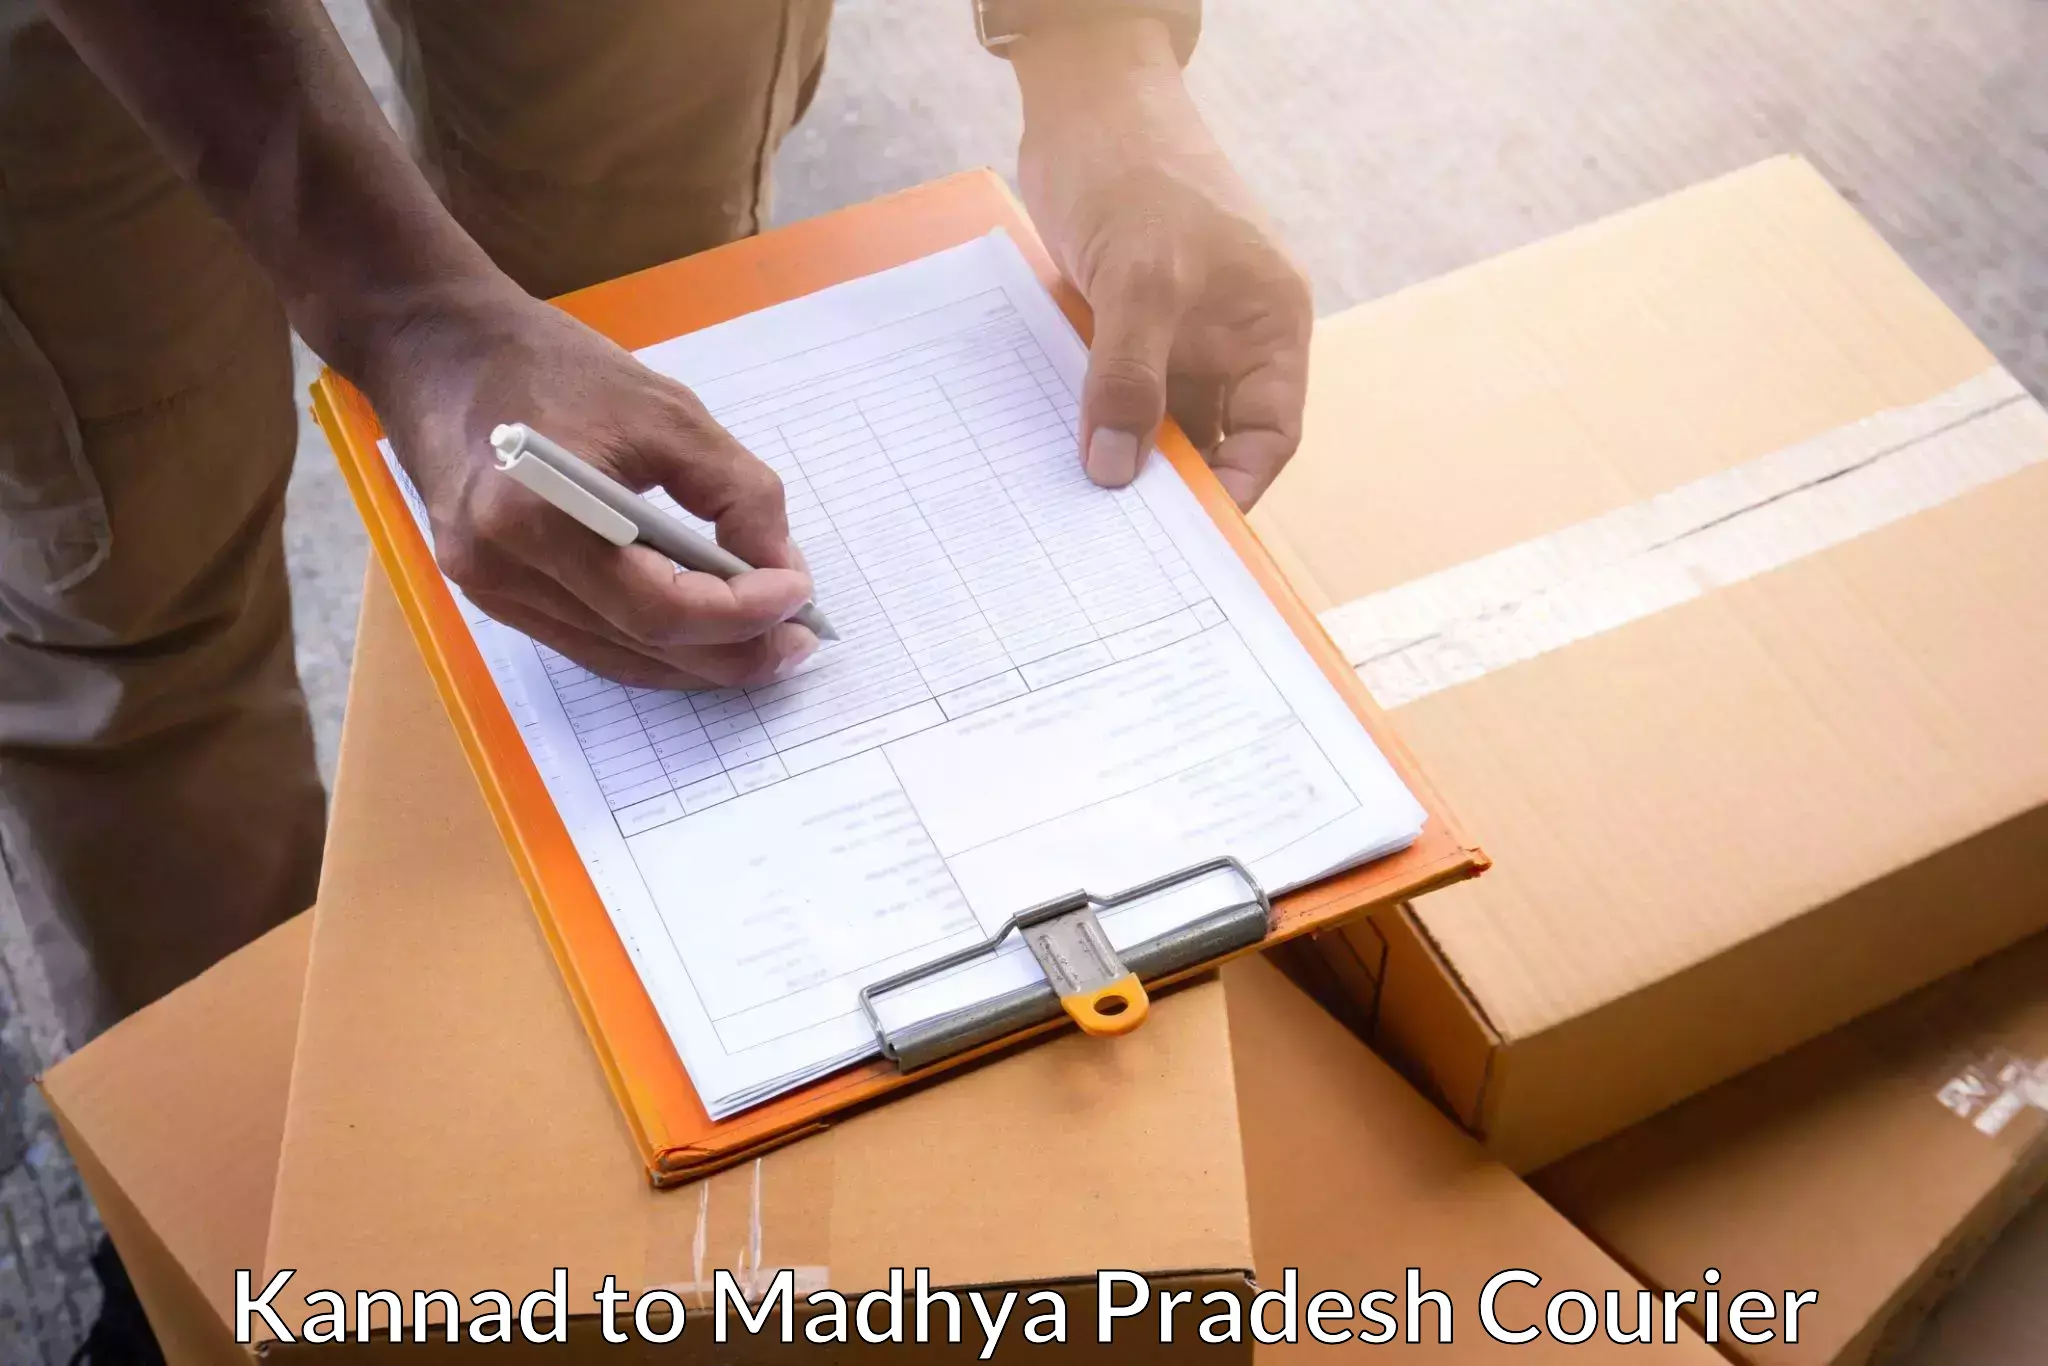 Pharmaceutical courier Kannad to Neemuch